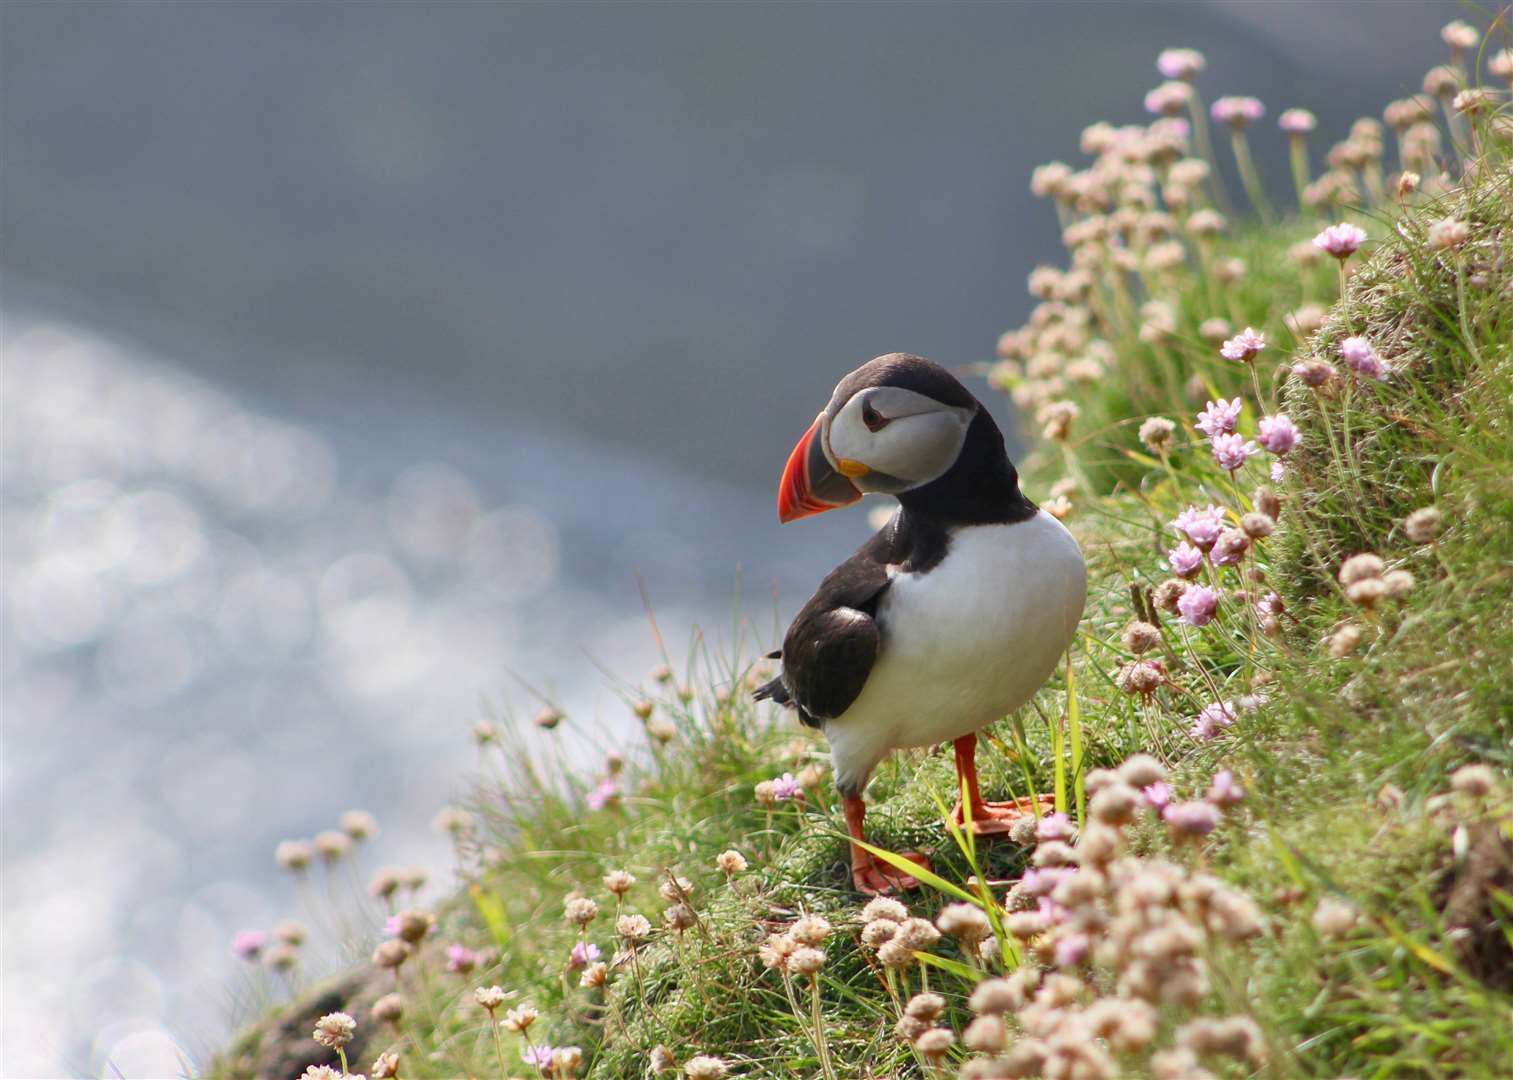 A puffin at Sumburgh Head in Shetland amid sea thrift, taken in 2019 – one of the photos featured in Every Last Puffin. Picture: Edward Hancox